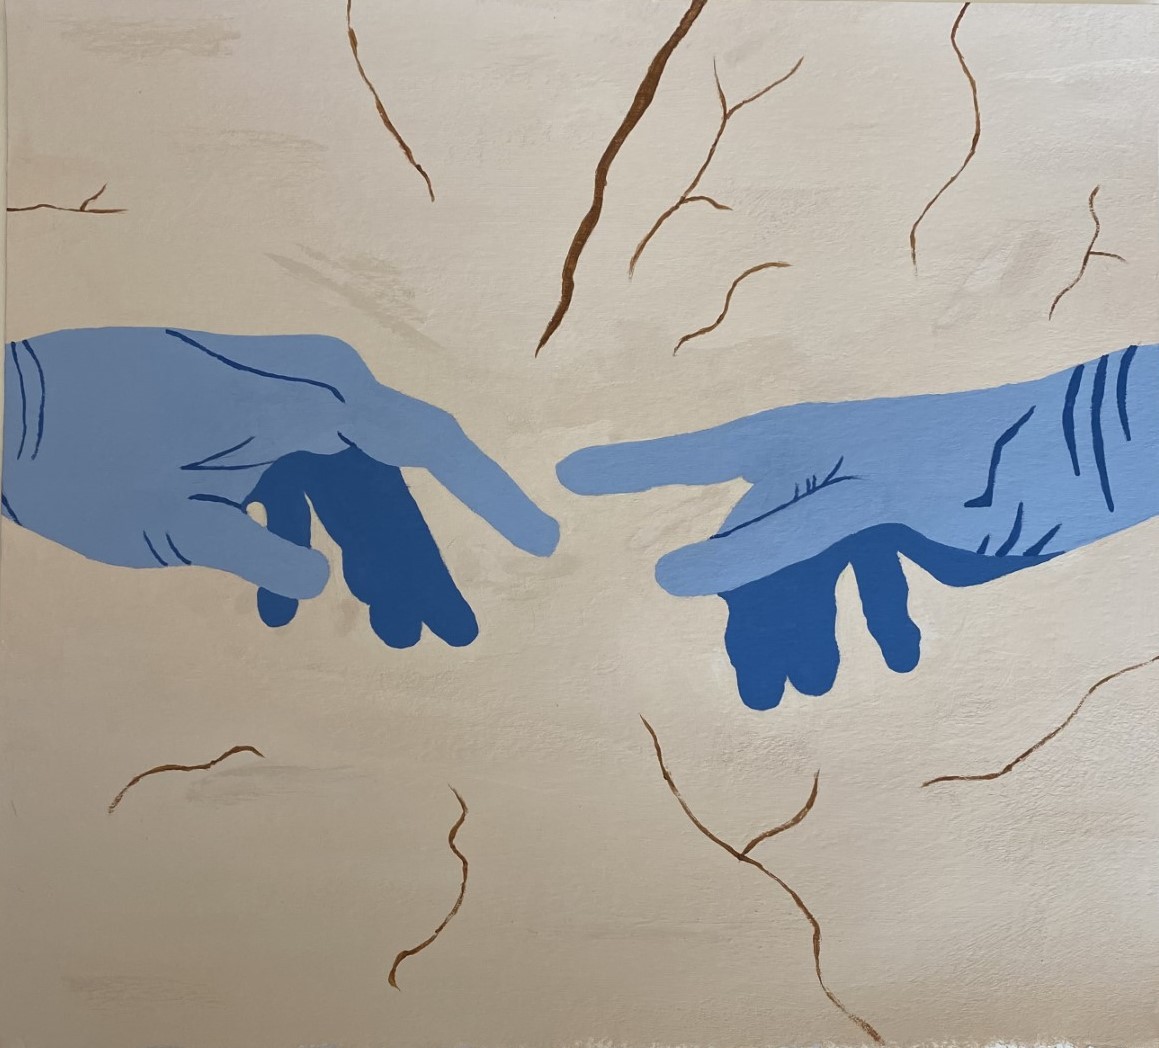 Two blue hands reading towards eachother with brown squiggly lines bursting around them.